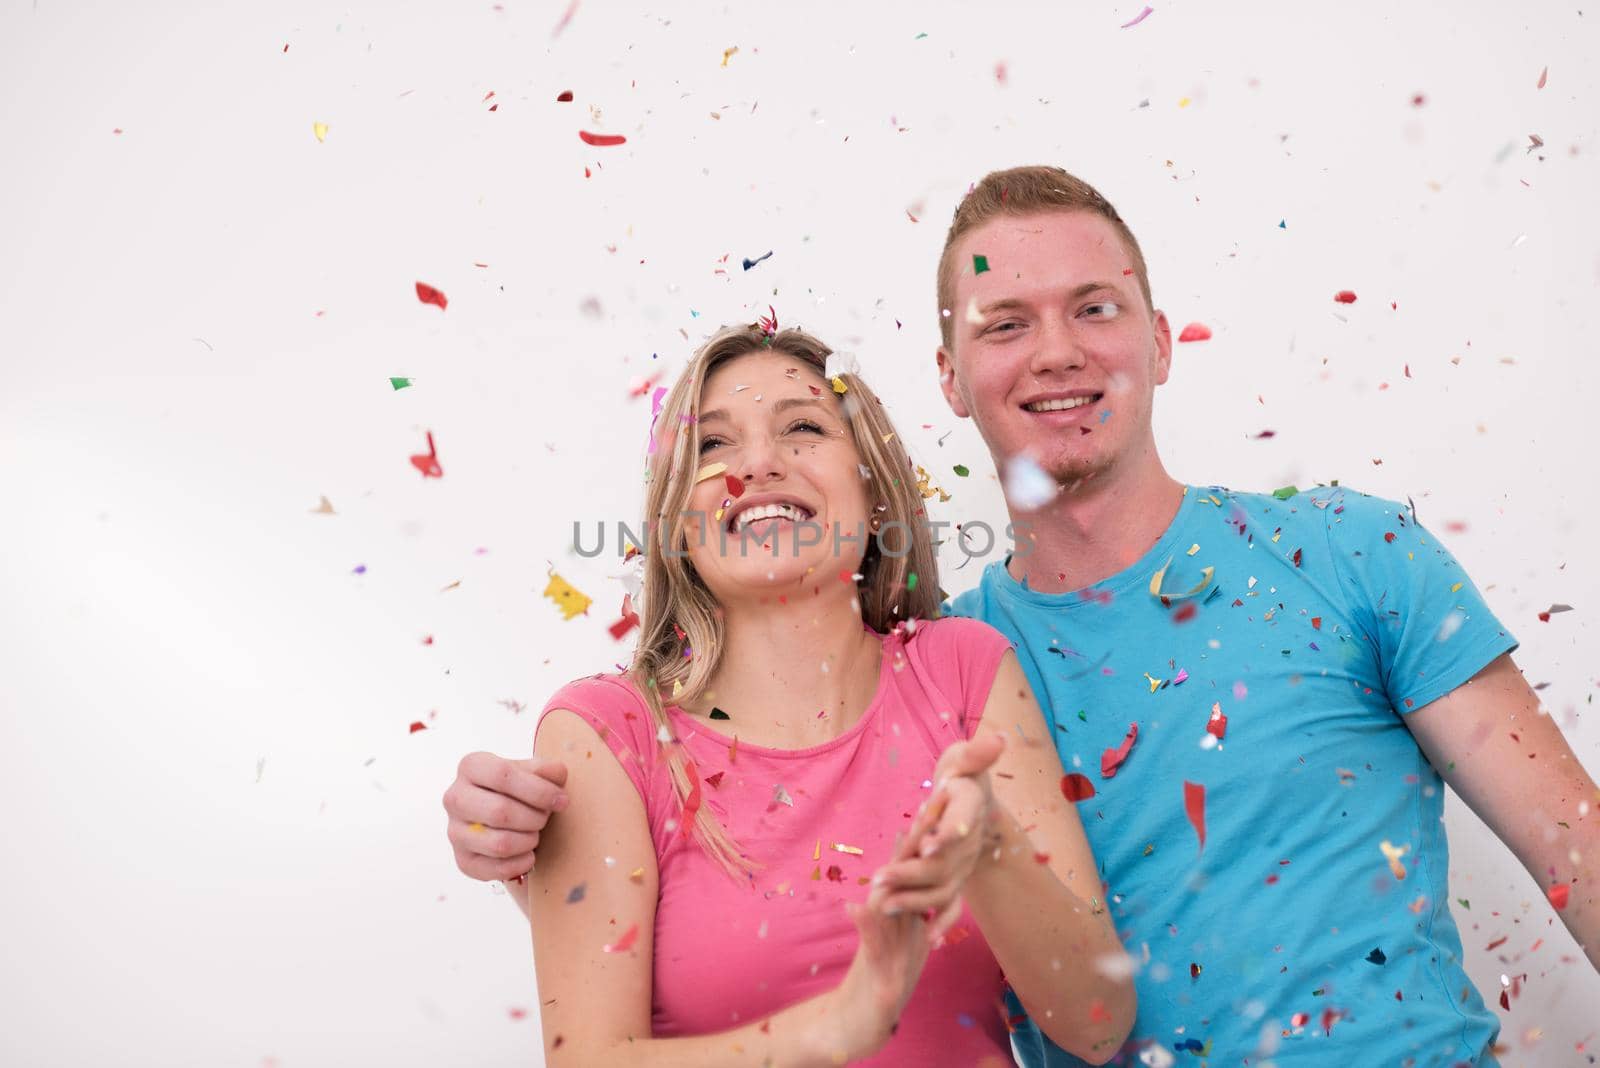 young romantic  couple in love  celebrating and blowing confetti decorations